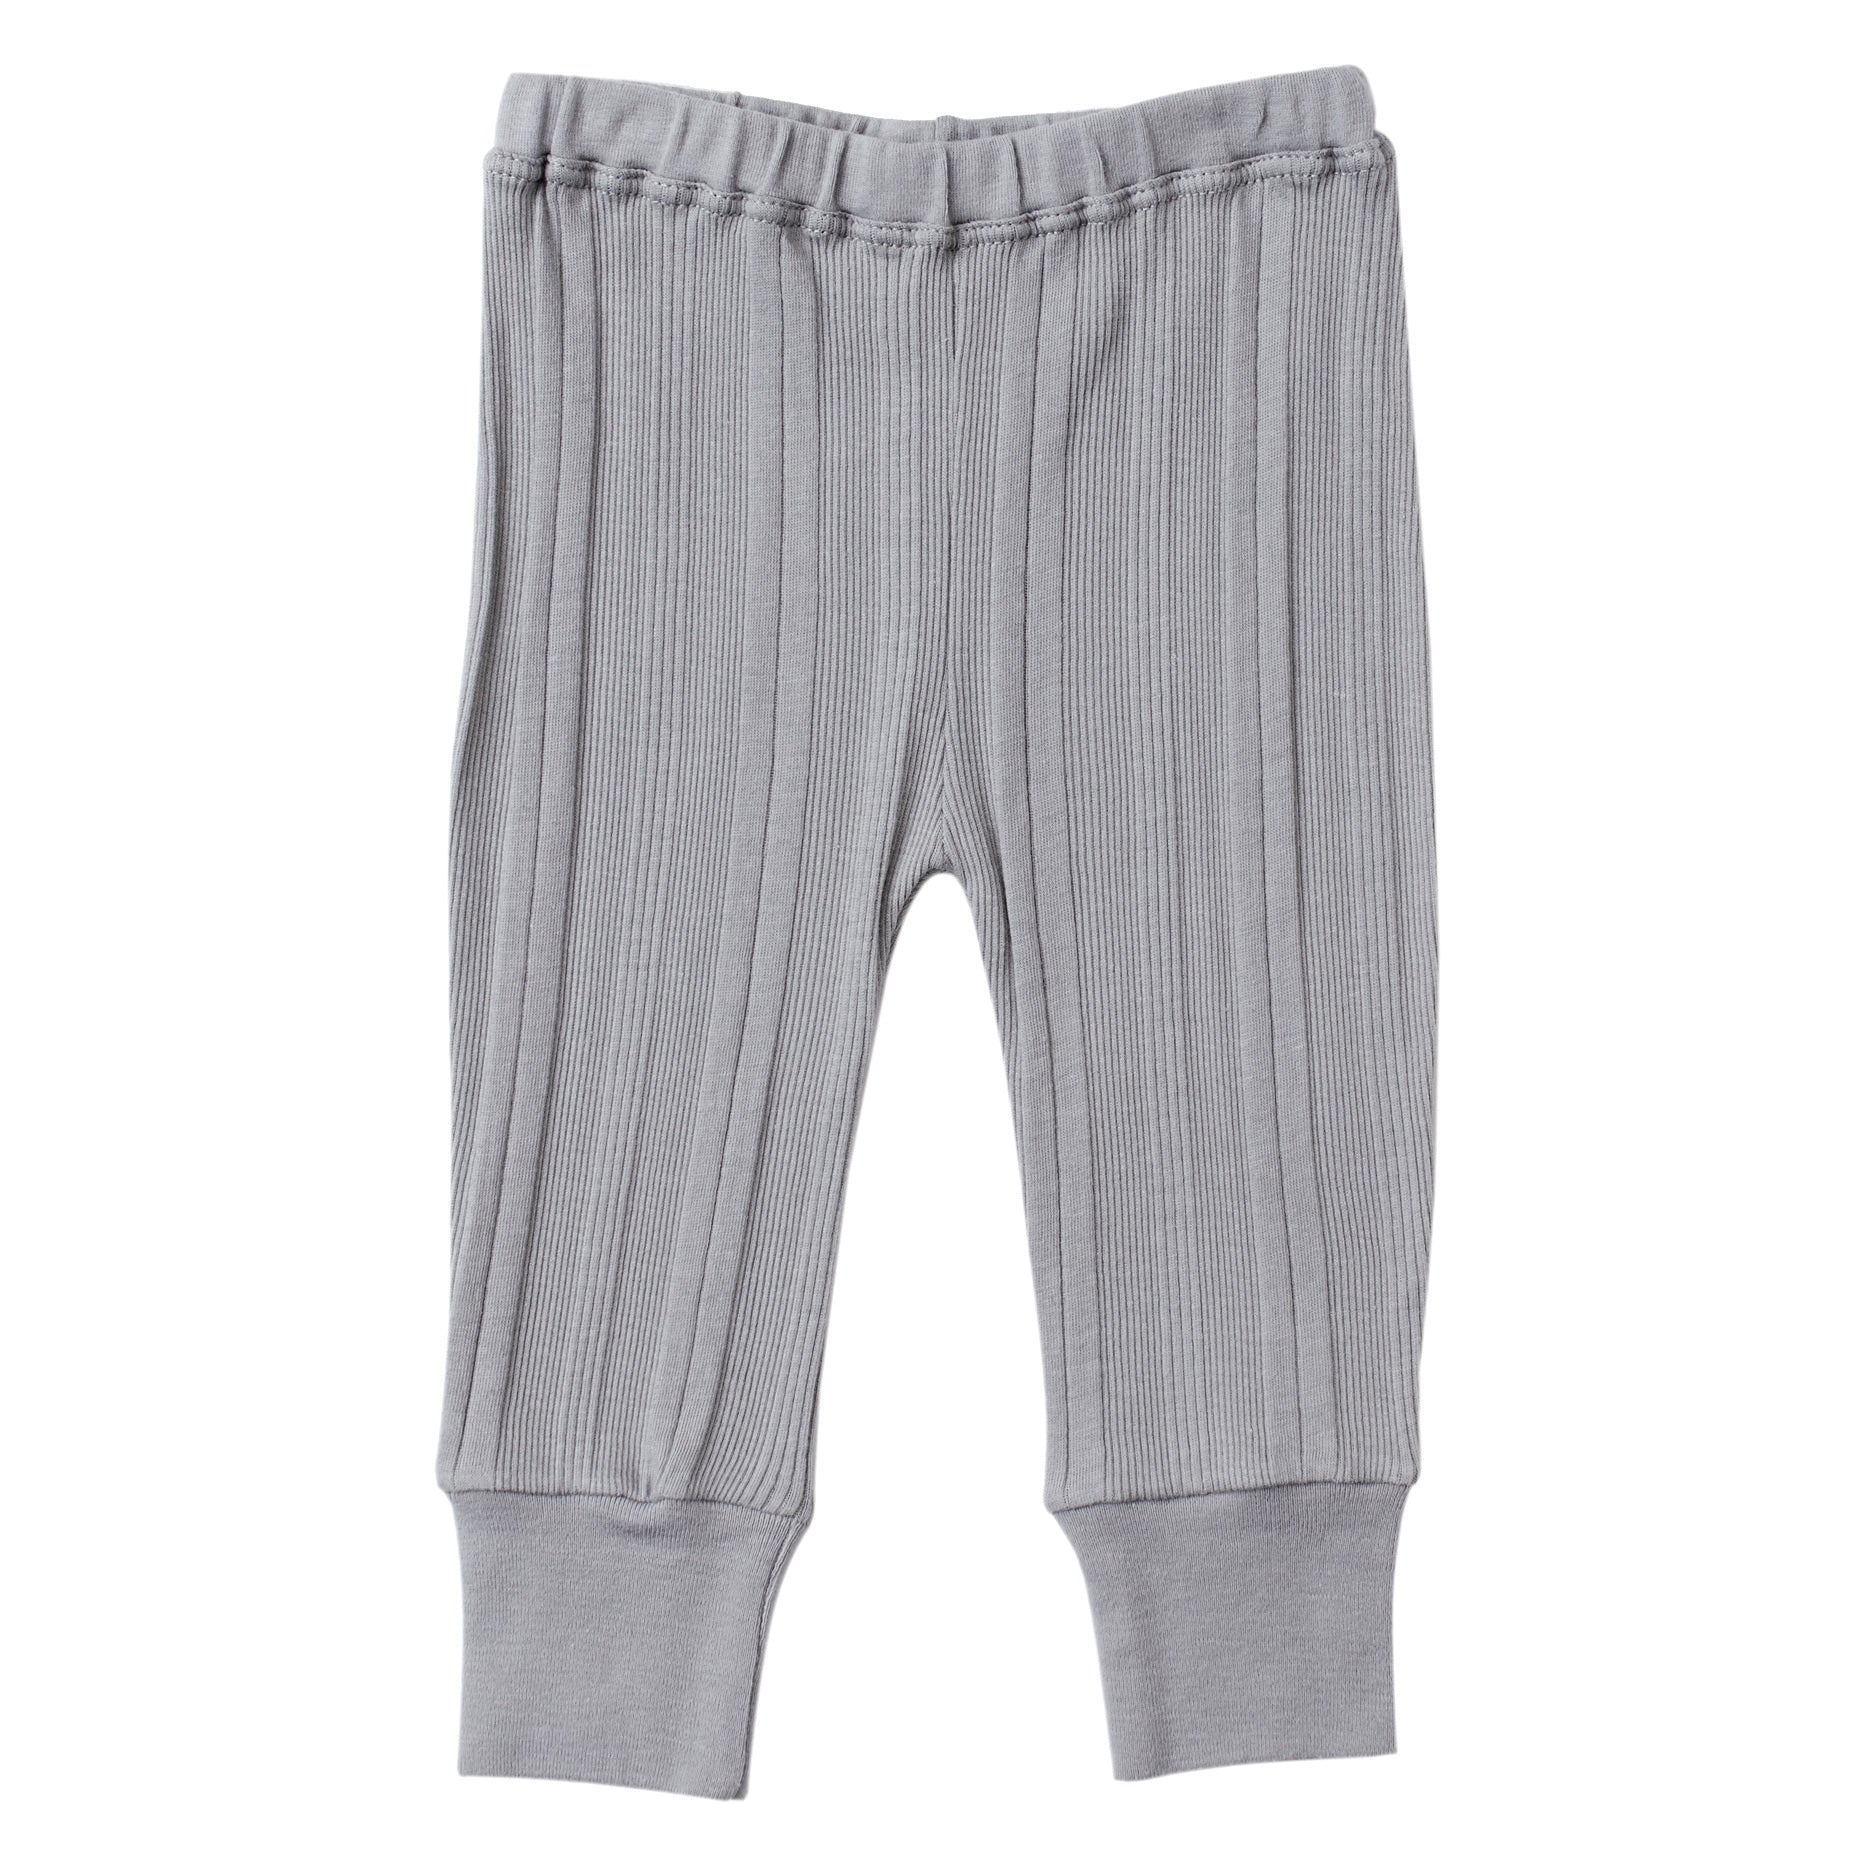 cool grey multi ribbed knit leggings with soft encased elastic at waistband.  100% organic cotton ribbed knit.